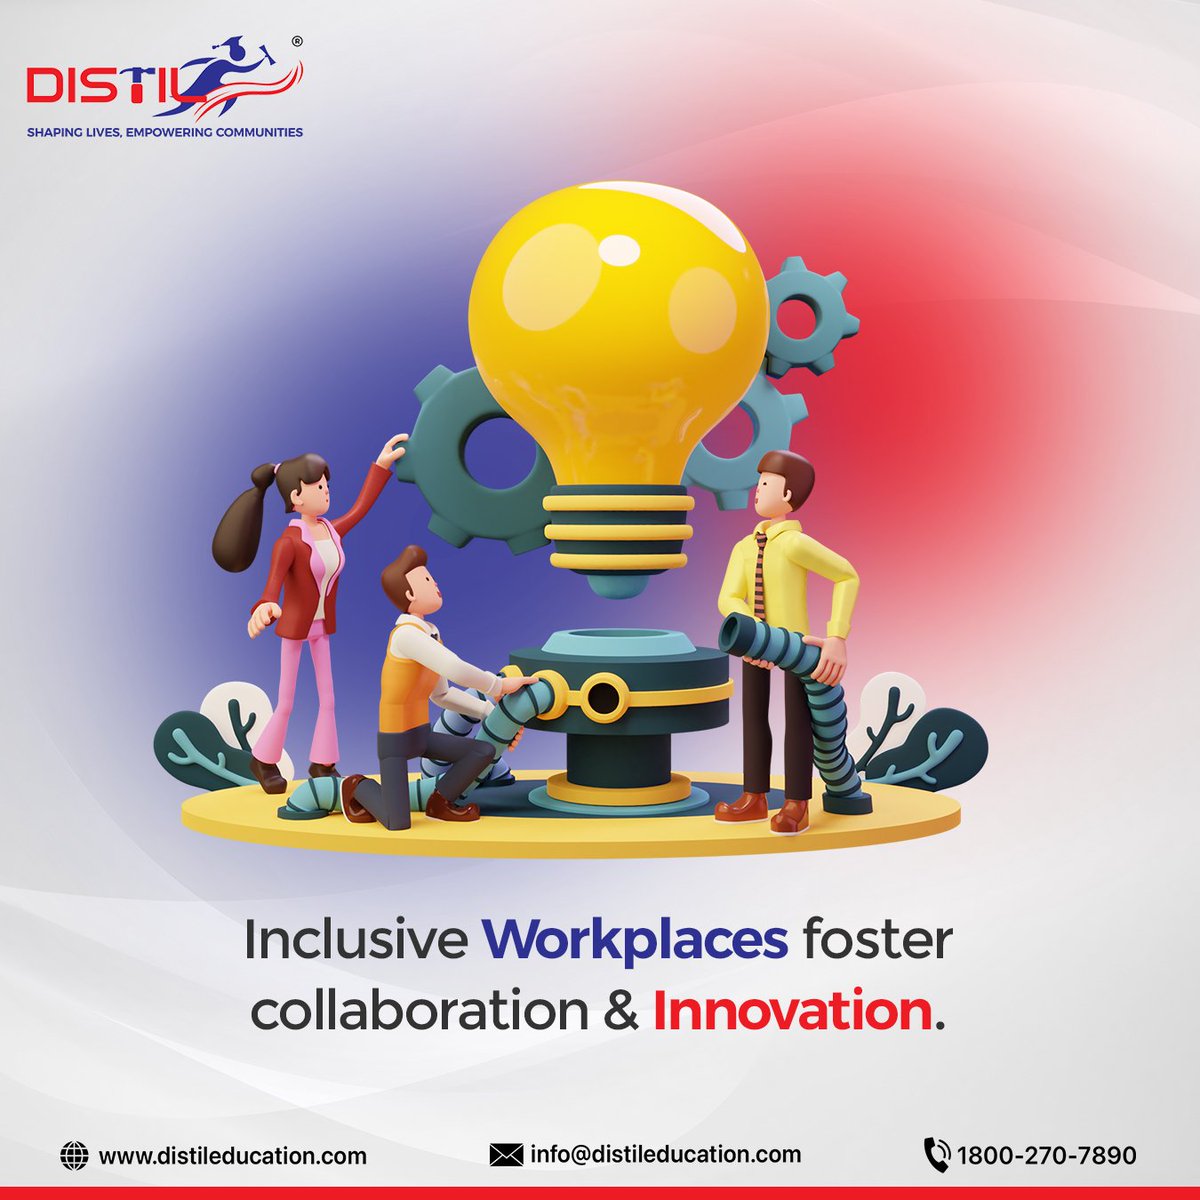 By embracing diversity and empowering every voice, organizations cultivate a breeding ground for collaboration and innovation. 

#distil #distilgroup #distileducation #InclusiveWorkforce #InnovationCulture #EmbraceDifferences #EmpowerEveryVoice #BreakingBarriers